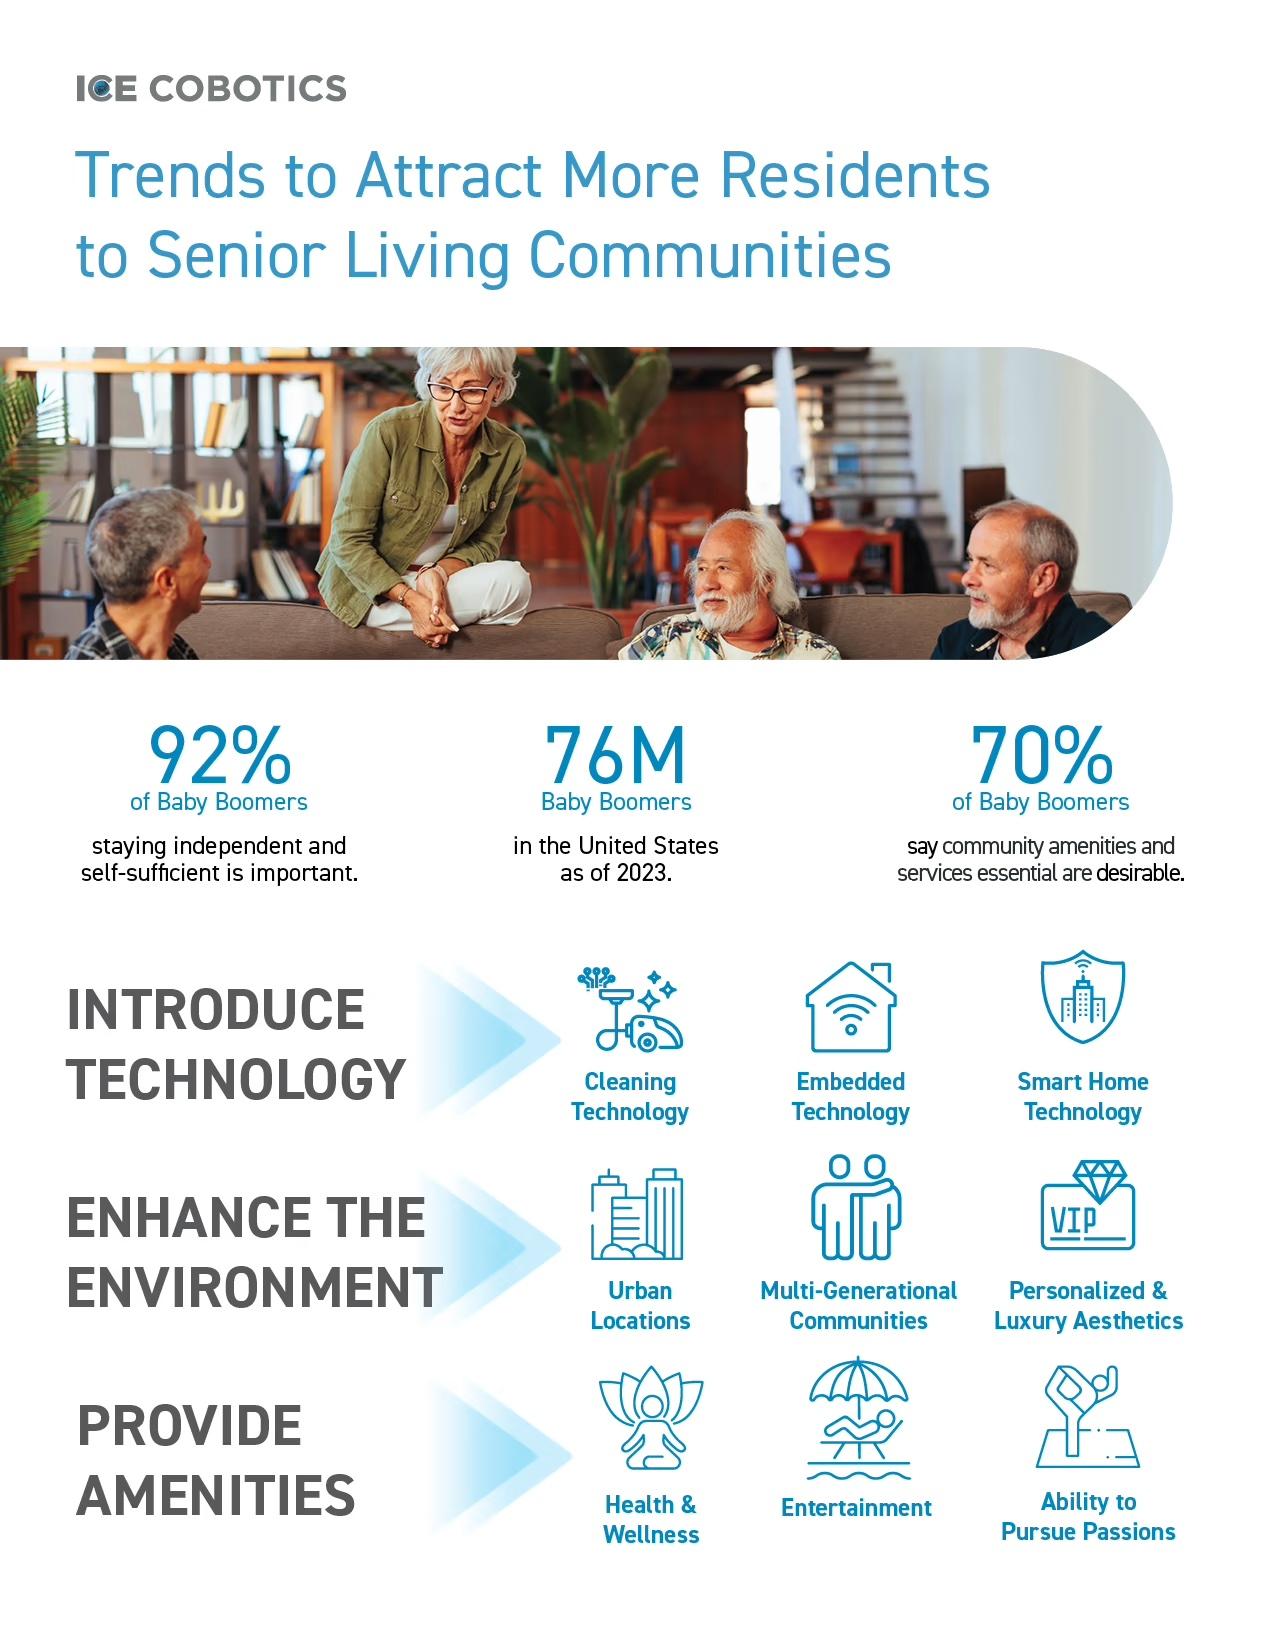 Infographic Guide: Trends to Attract Residents to Senior Living Communities lists data and statistics that impact senior citizens